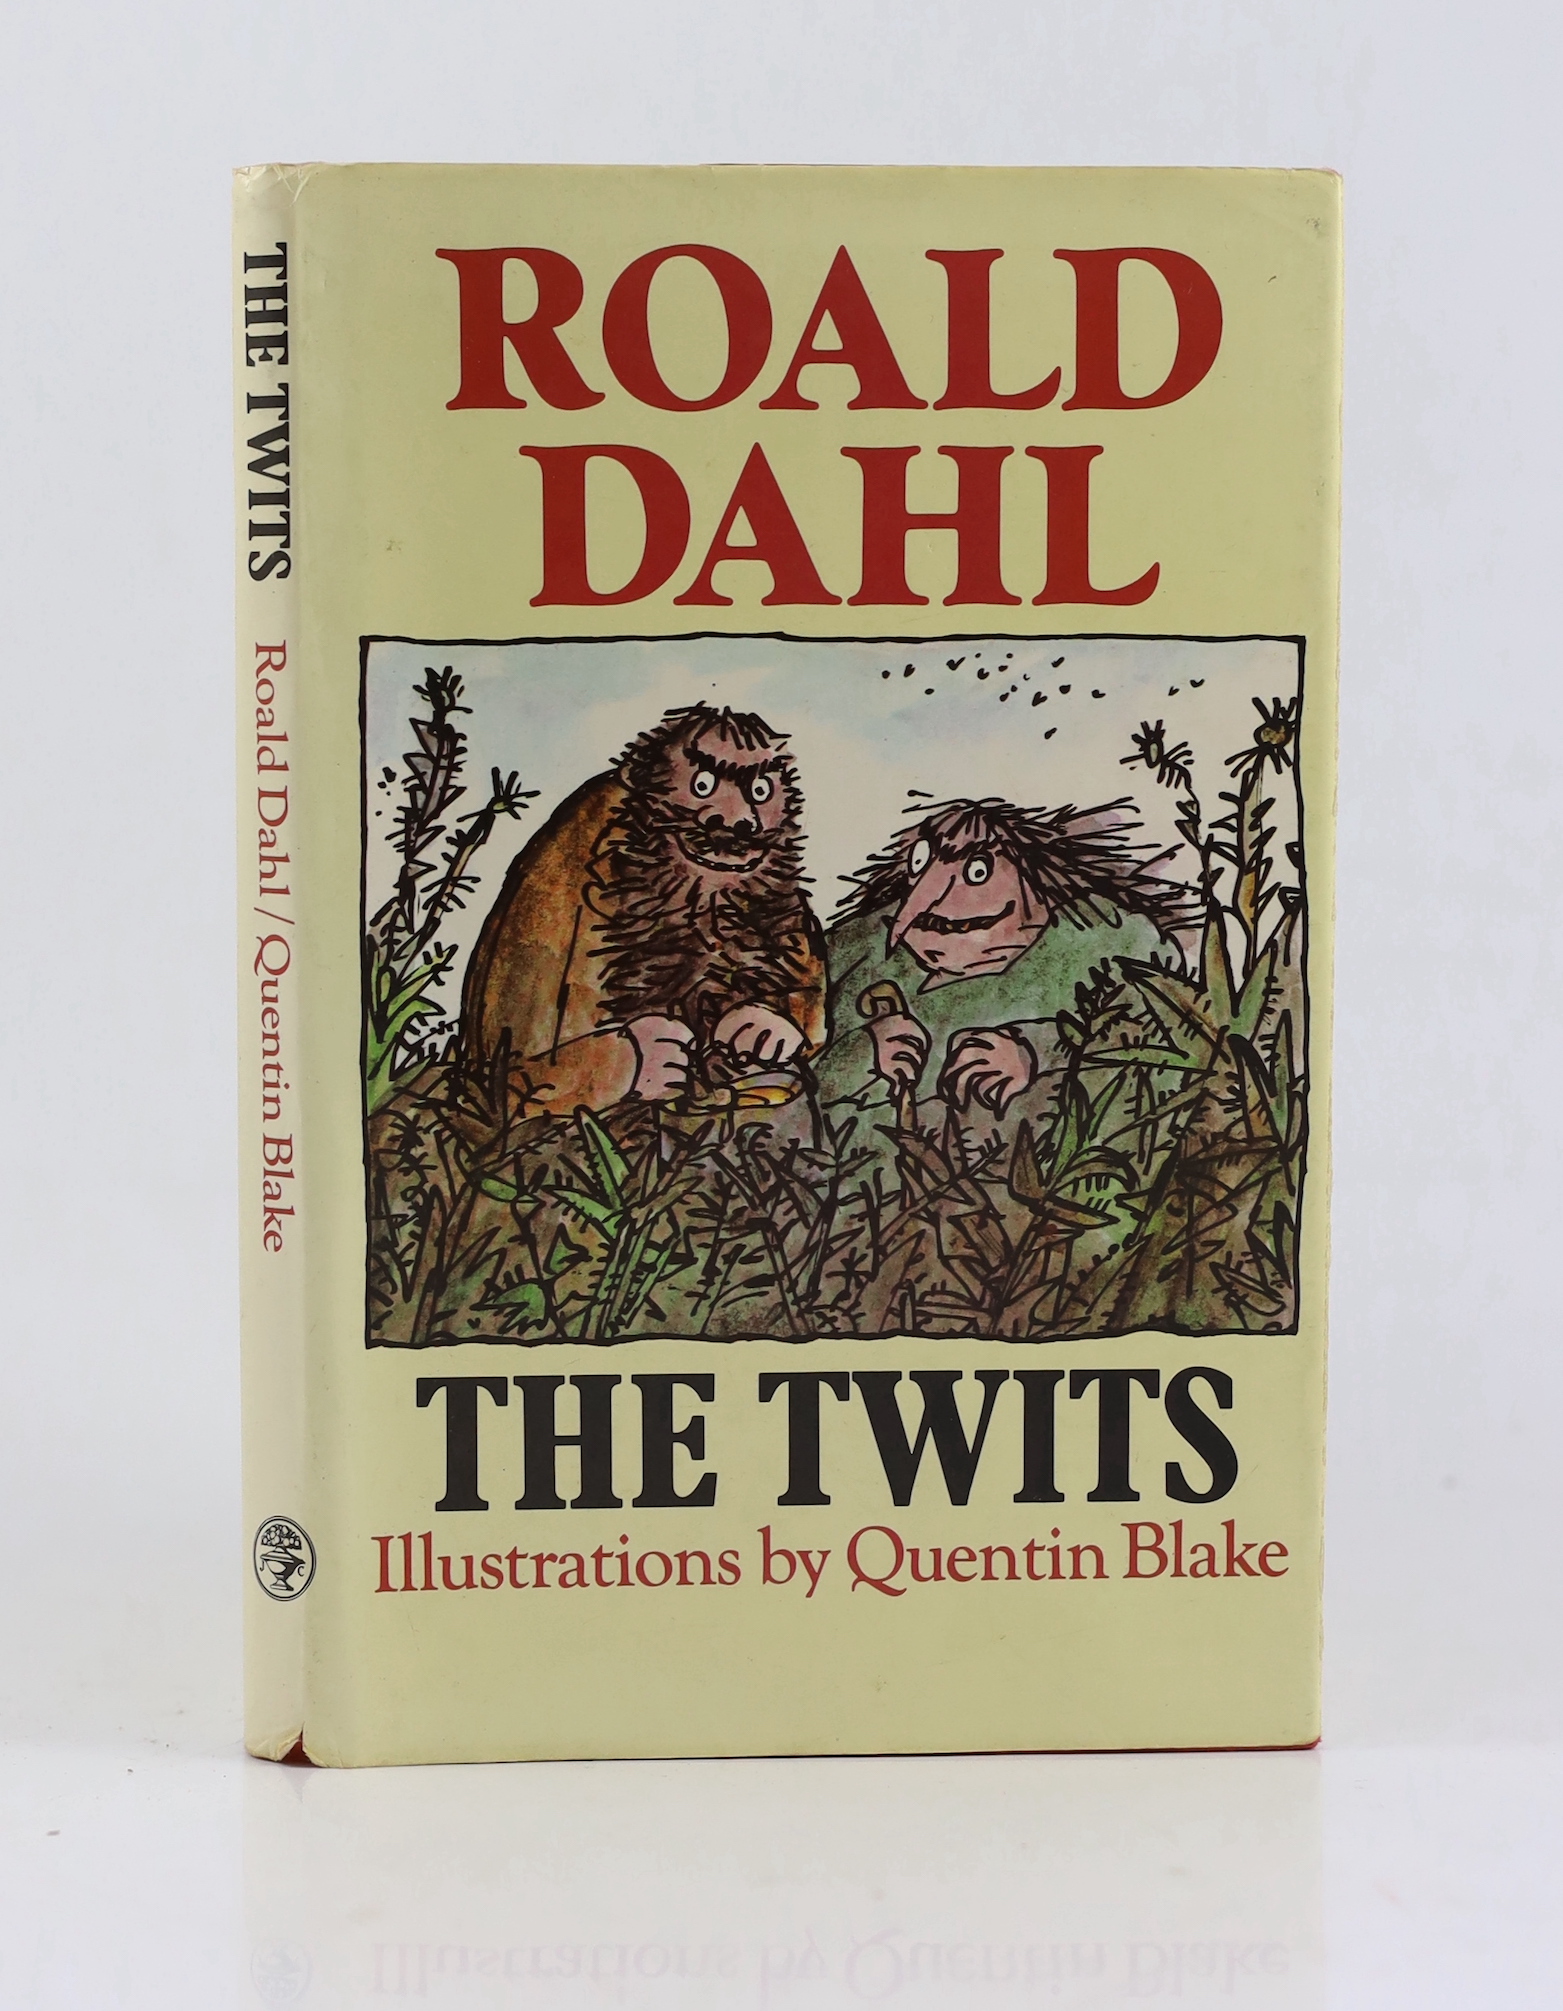 Dahl, Roald - The Twits, illustrated by Quentin Blake, 8vo, original cloth in clipped d/j, ink ownership inscription to front fly leaf, Jonathan Cape, London, 1980